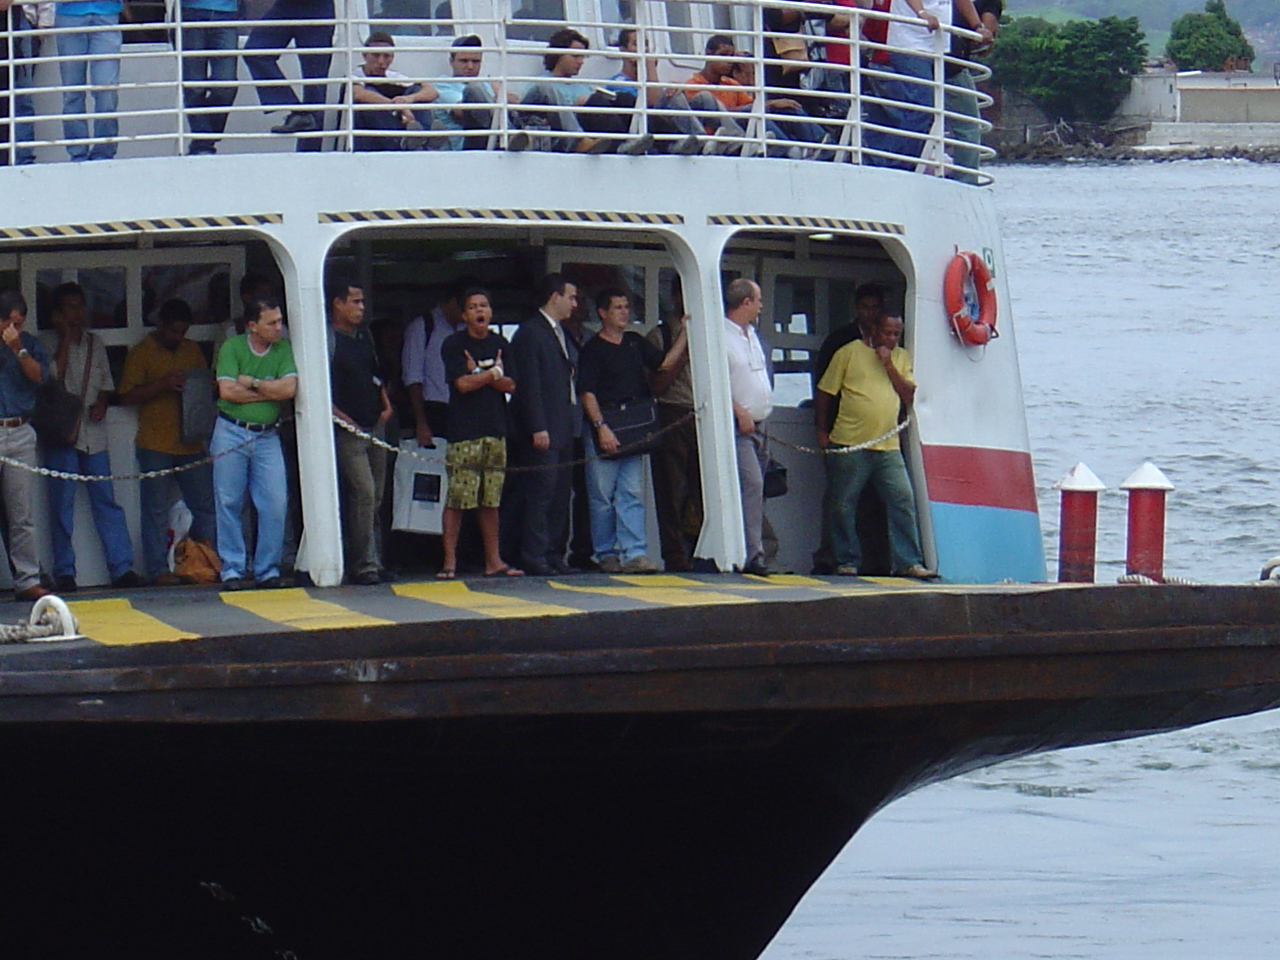 a large crowd of people on the deck of a boat